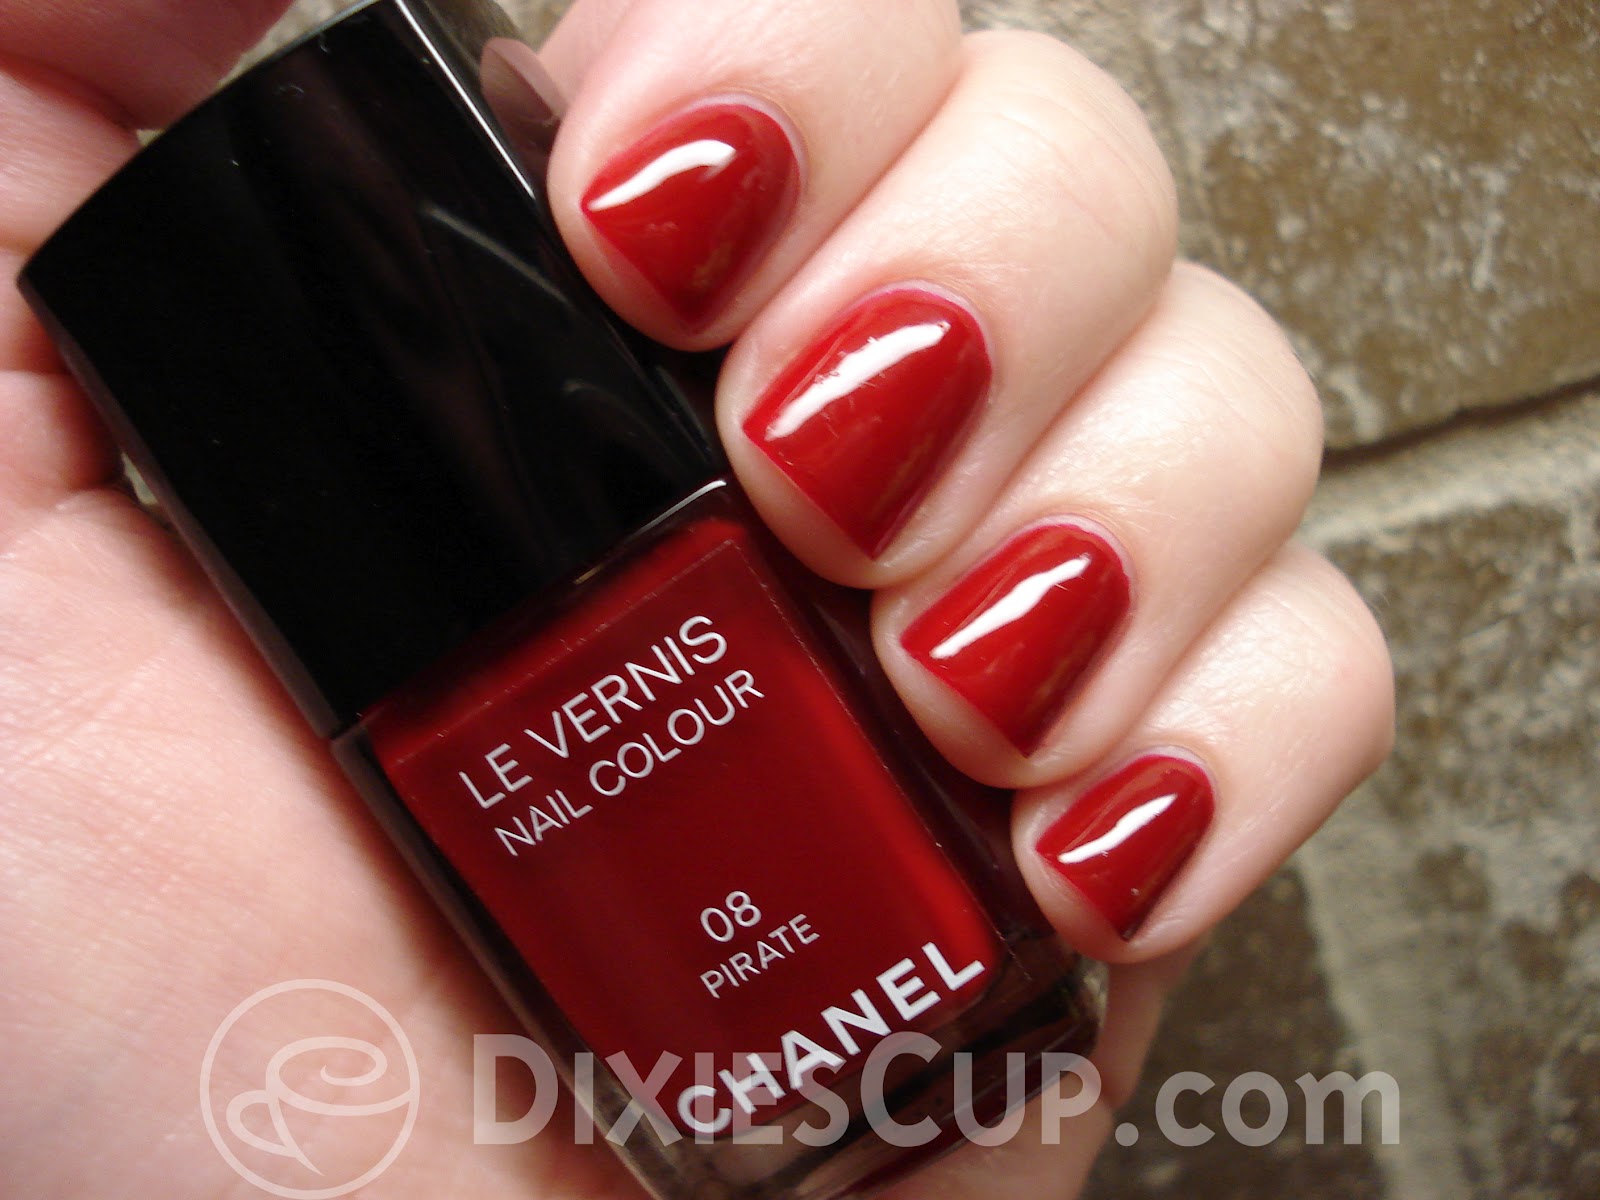 Comparing Chanel Le Vernis In 08 Pirate With Others